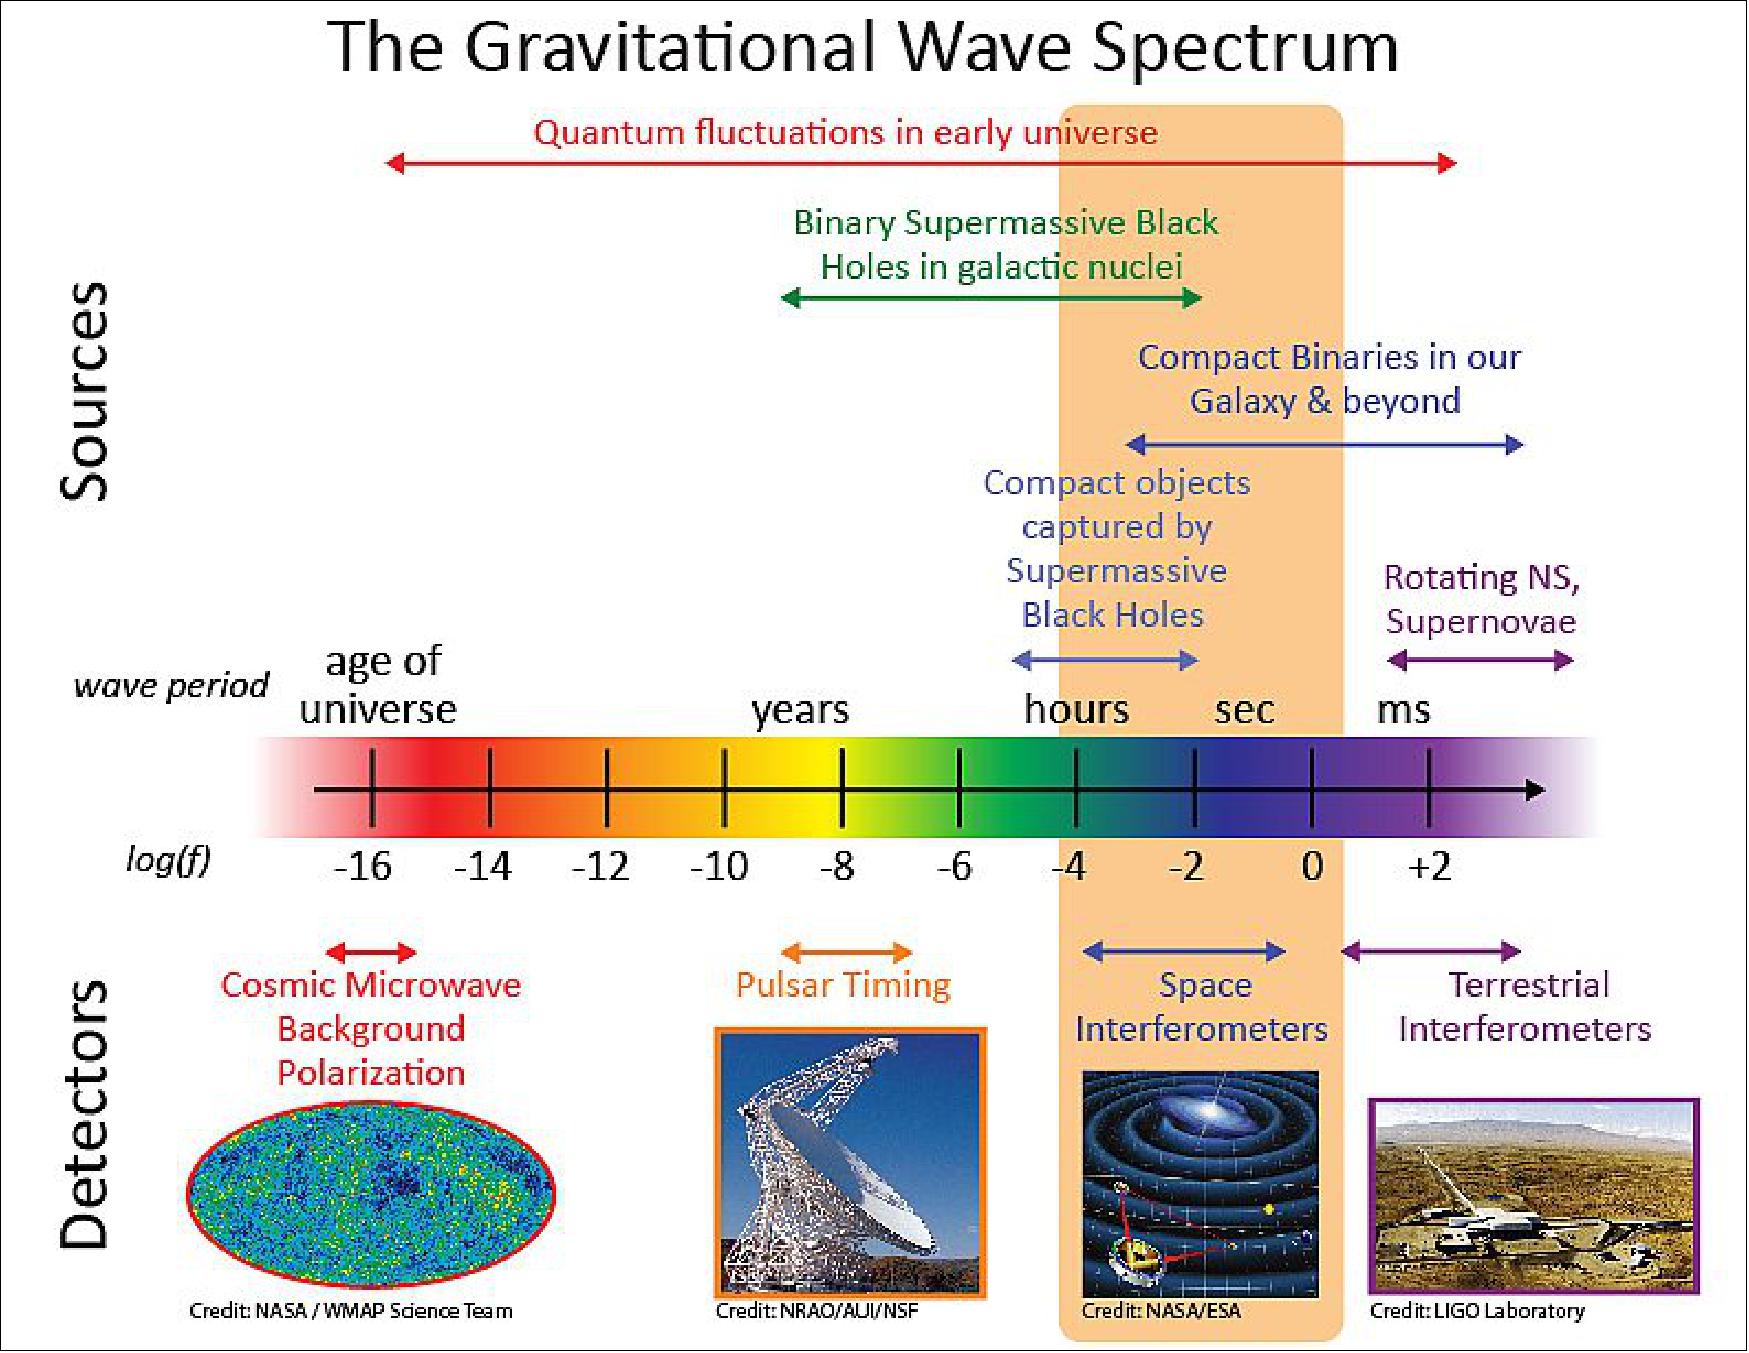 Figure 3: There are promising detection techniques across the entire gravitational wave spectrum, which is populated by a broad range of astrophysical sources. The spectrum in the region probed by LISA is one of the most interesting, populated by a rich diversity in astrophysical phenomena of interest to astronomers and astrophysicists (image credit: image credit: NASA, ESA)